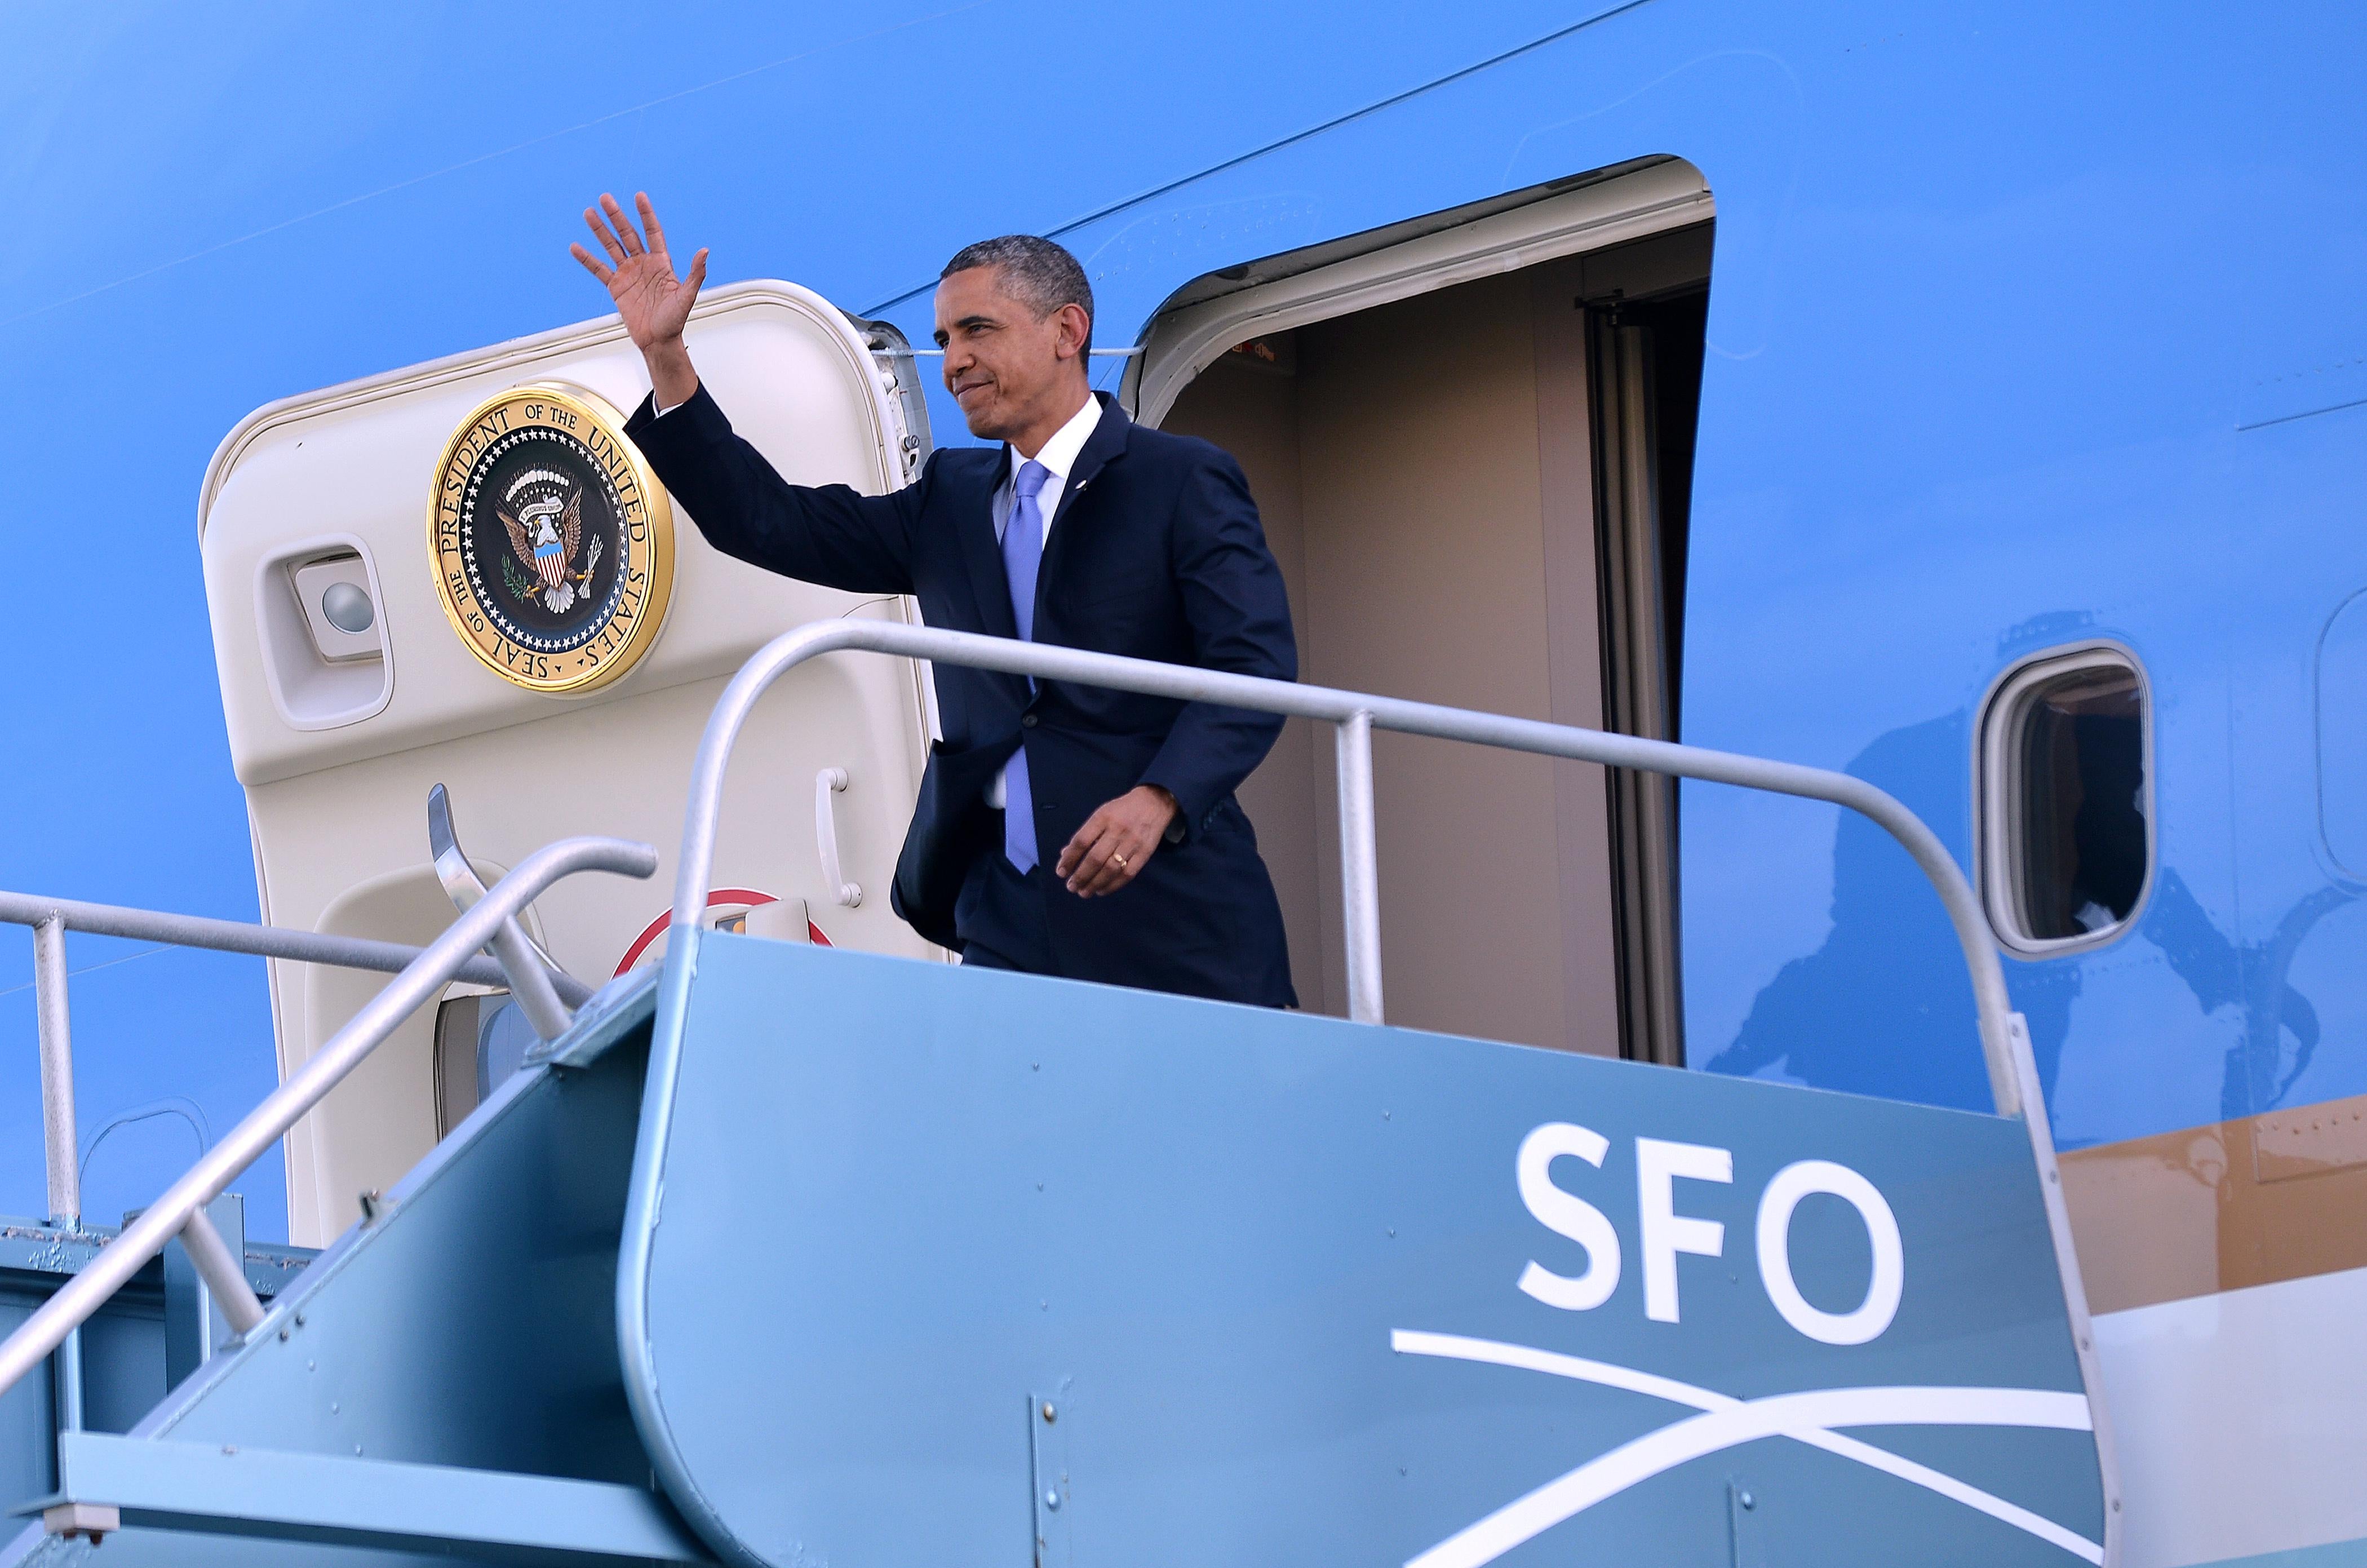 President Barack Obama disembarks from Air Force One at San Francisco International Airport, April 3, 2013.